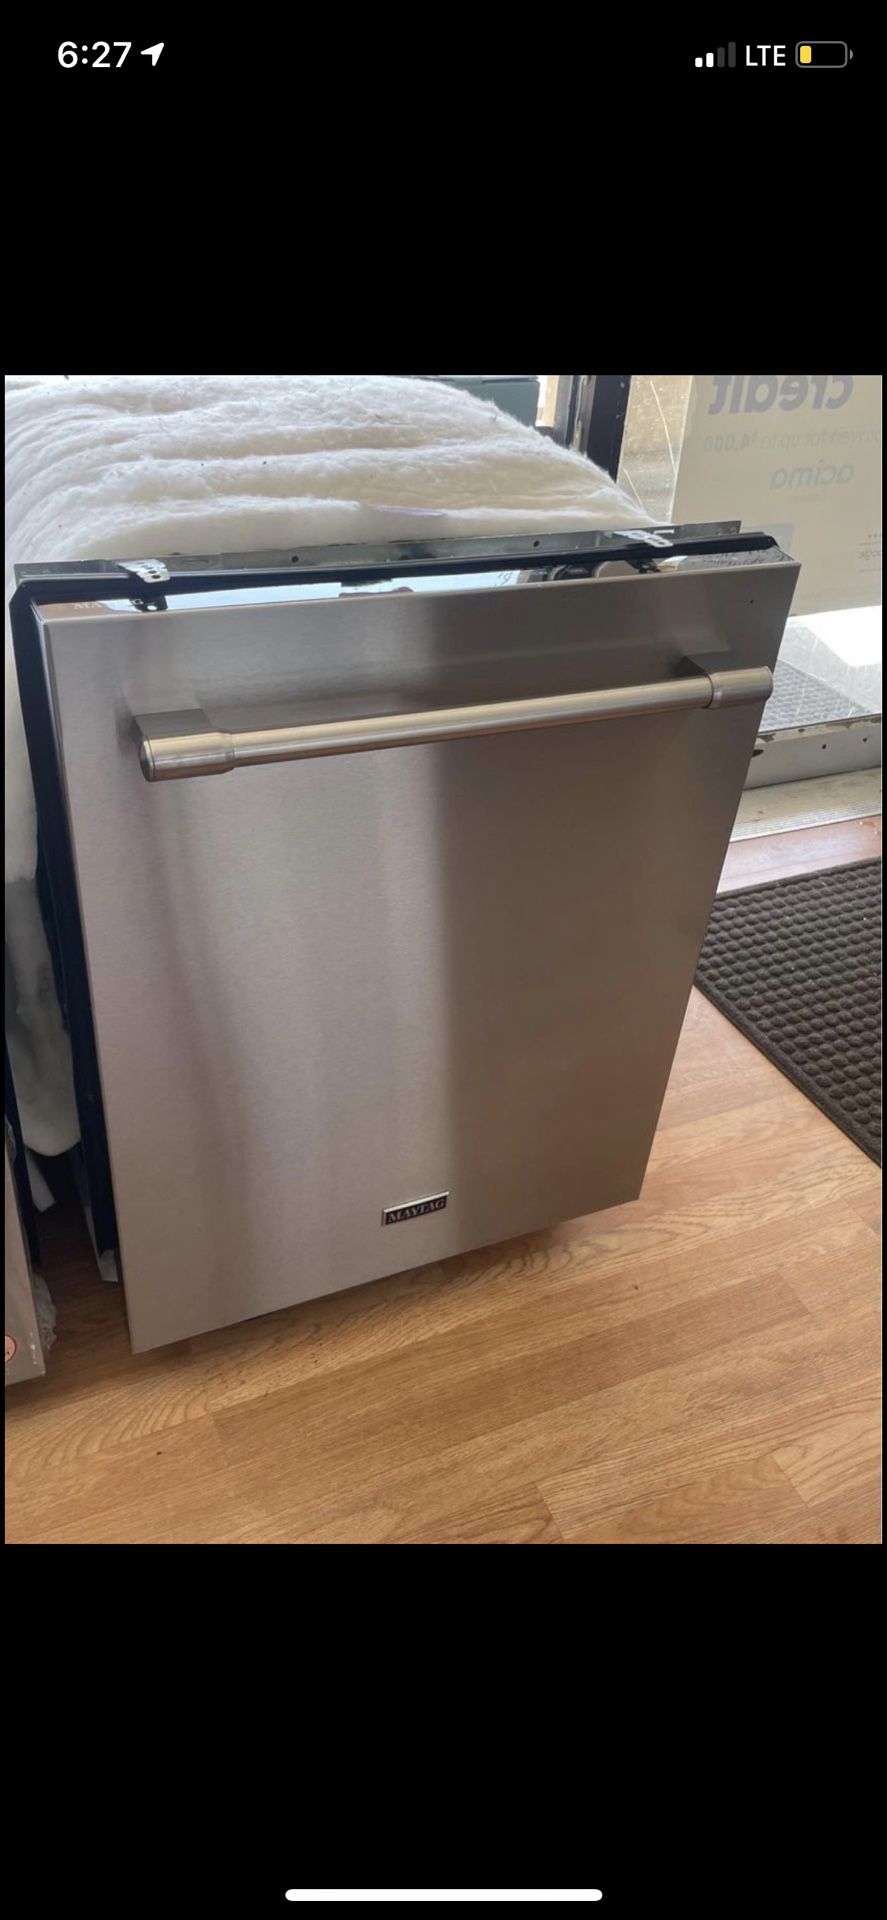 Maytag Dishwasher with Third Level Rack and Dual Power/Dual power filtration